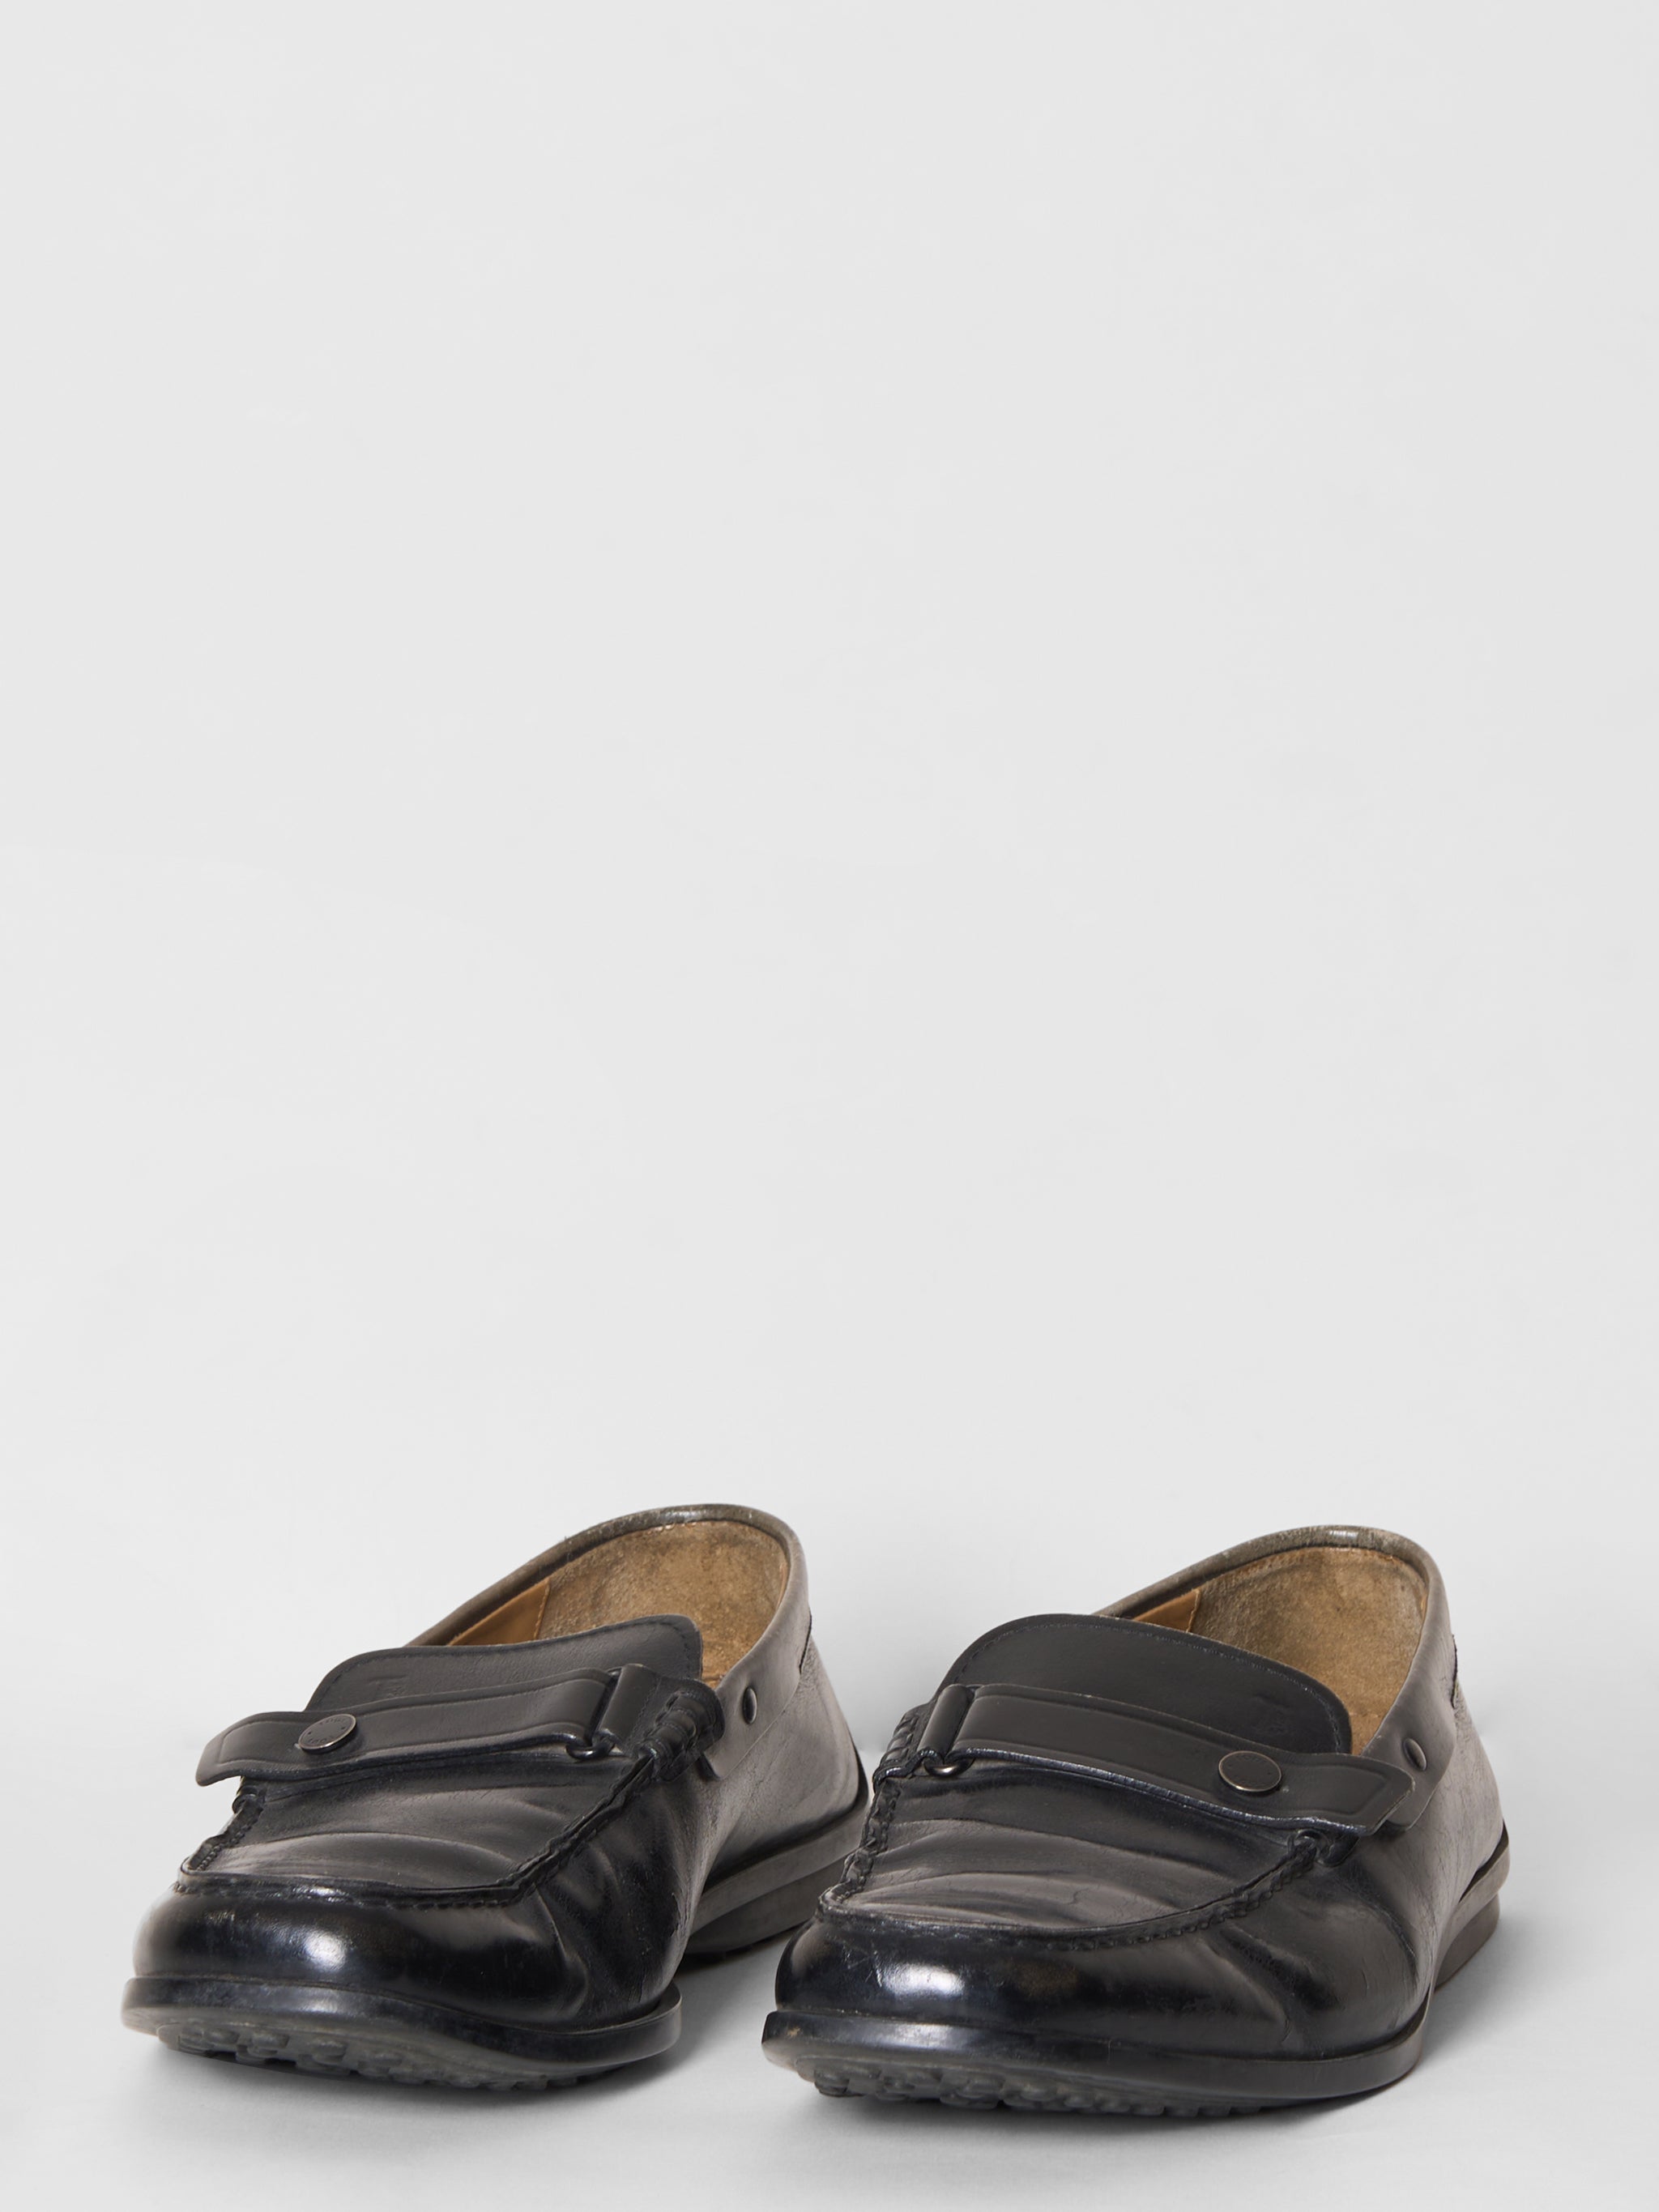 Tods Black Buckle Loafers